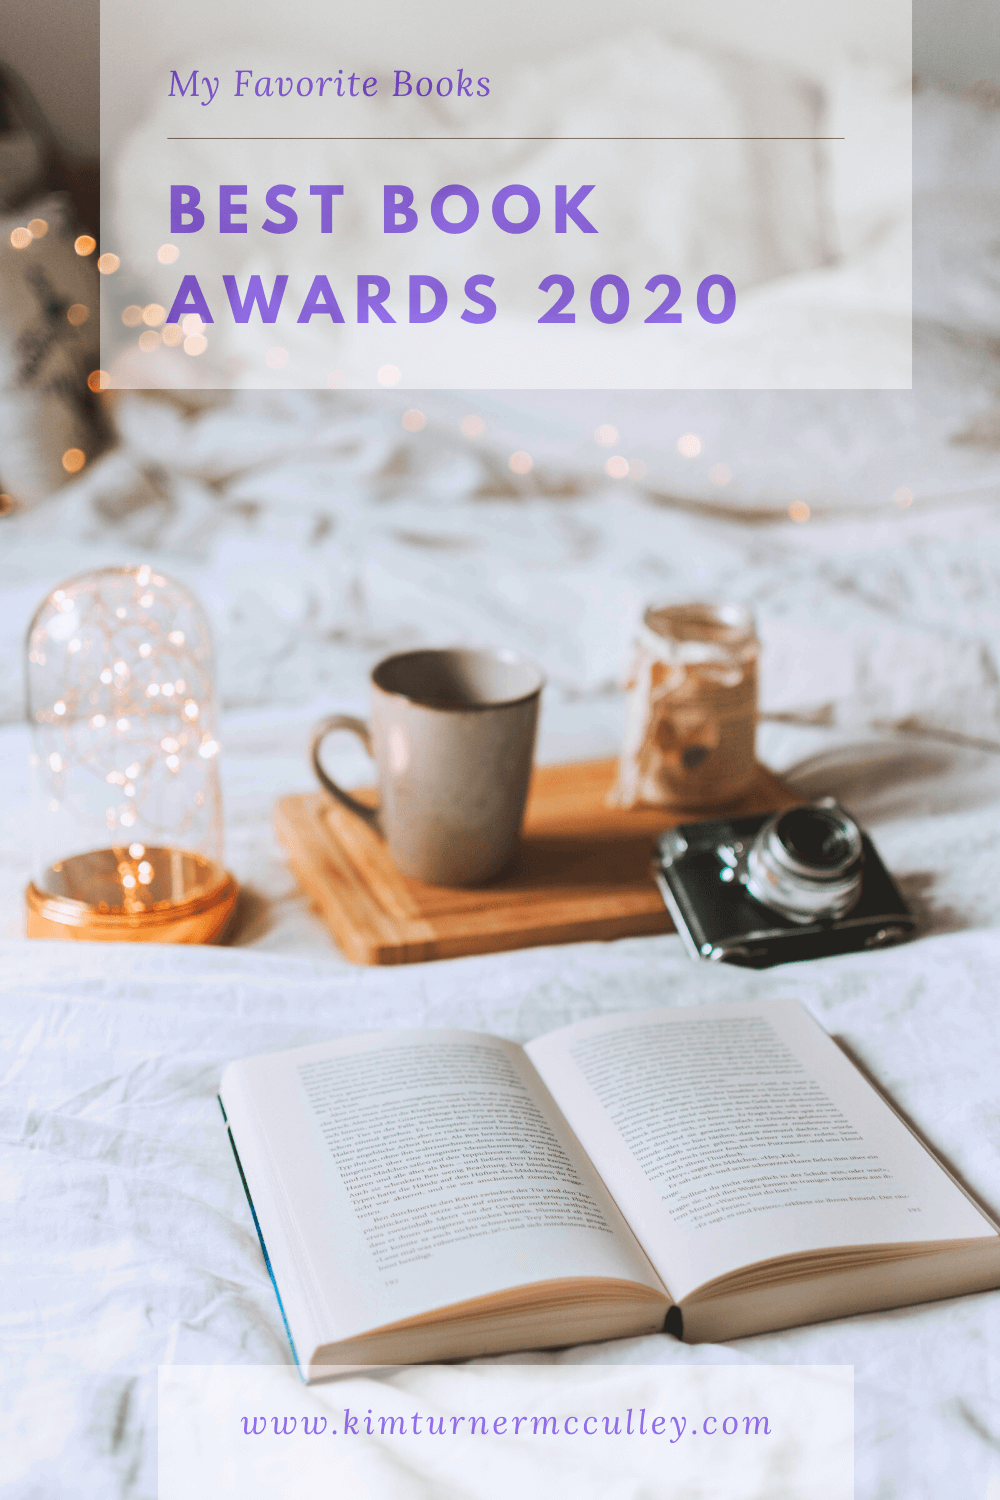 Kim's Best Book Awards 2020. Fiction and Nonfiction, Christian Fiction and Nonfiction. #bookrecommendations